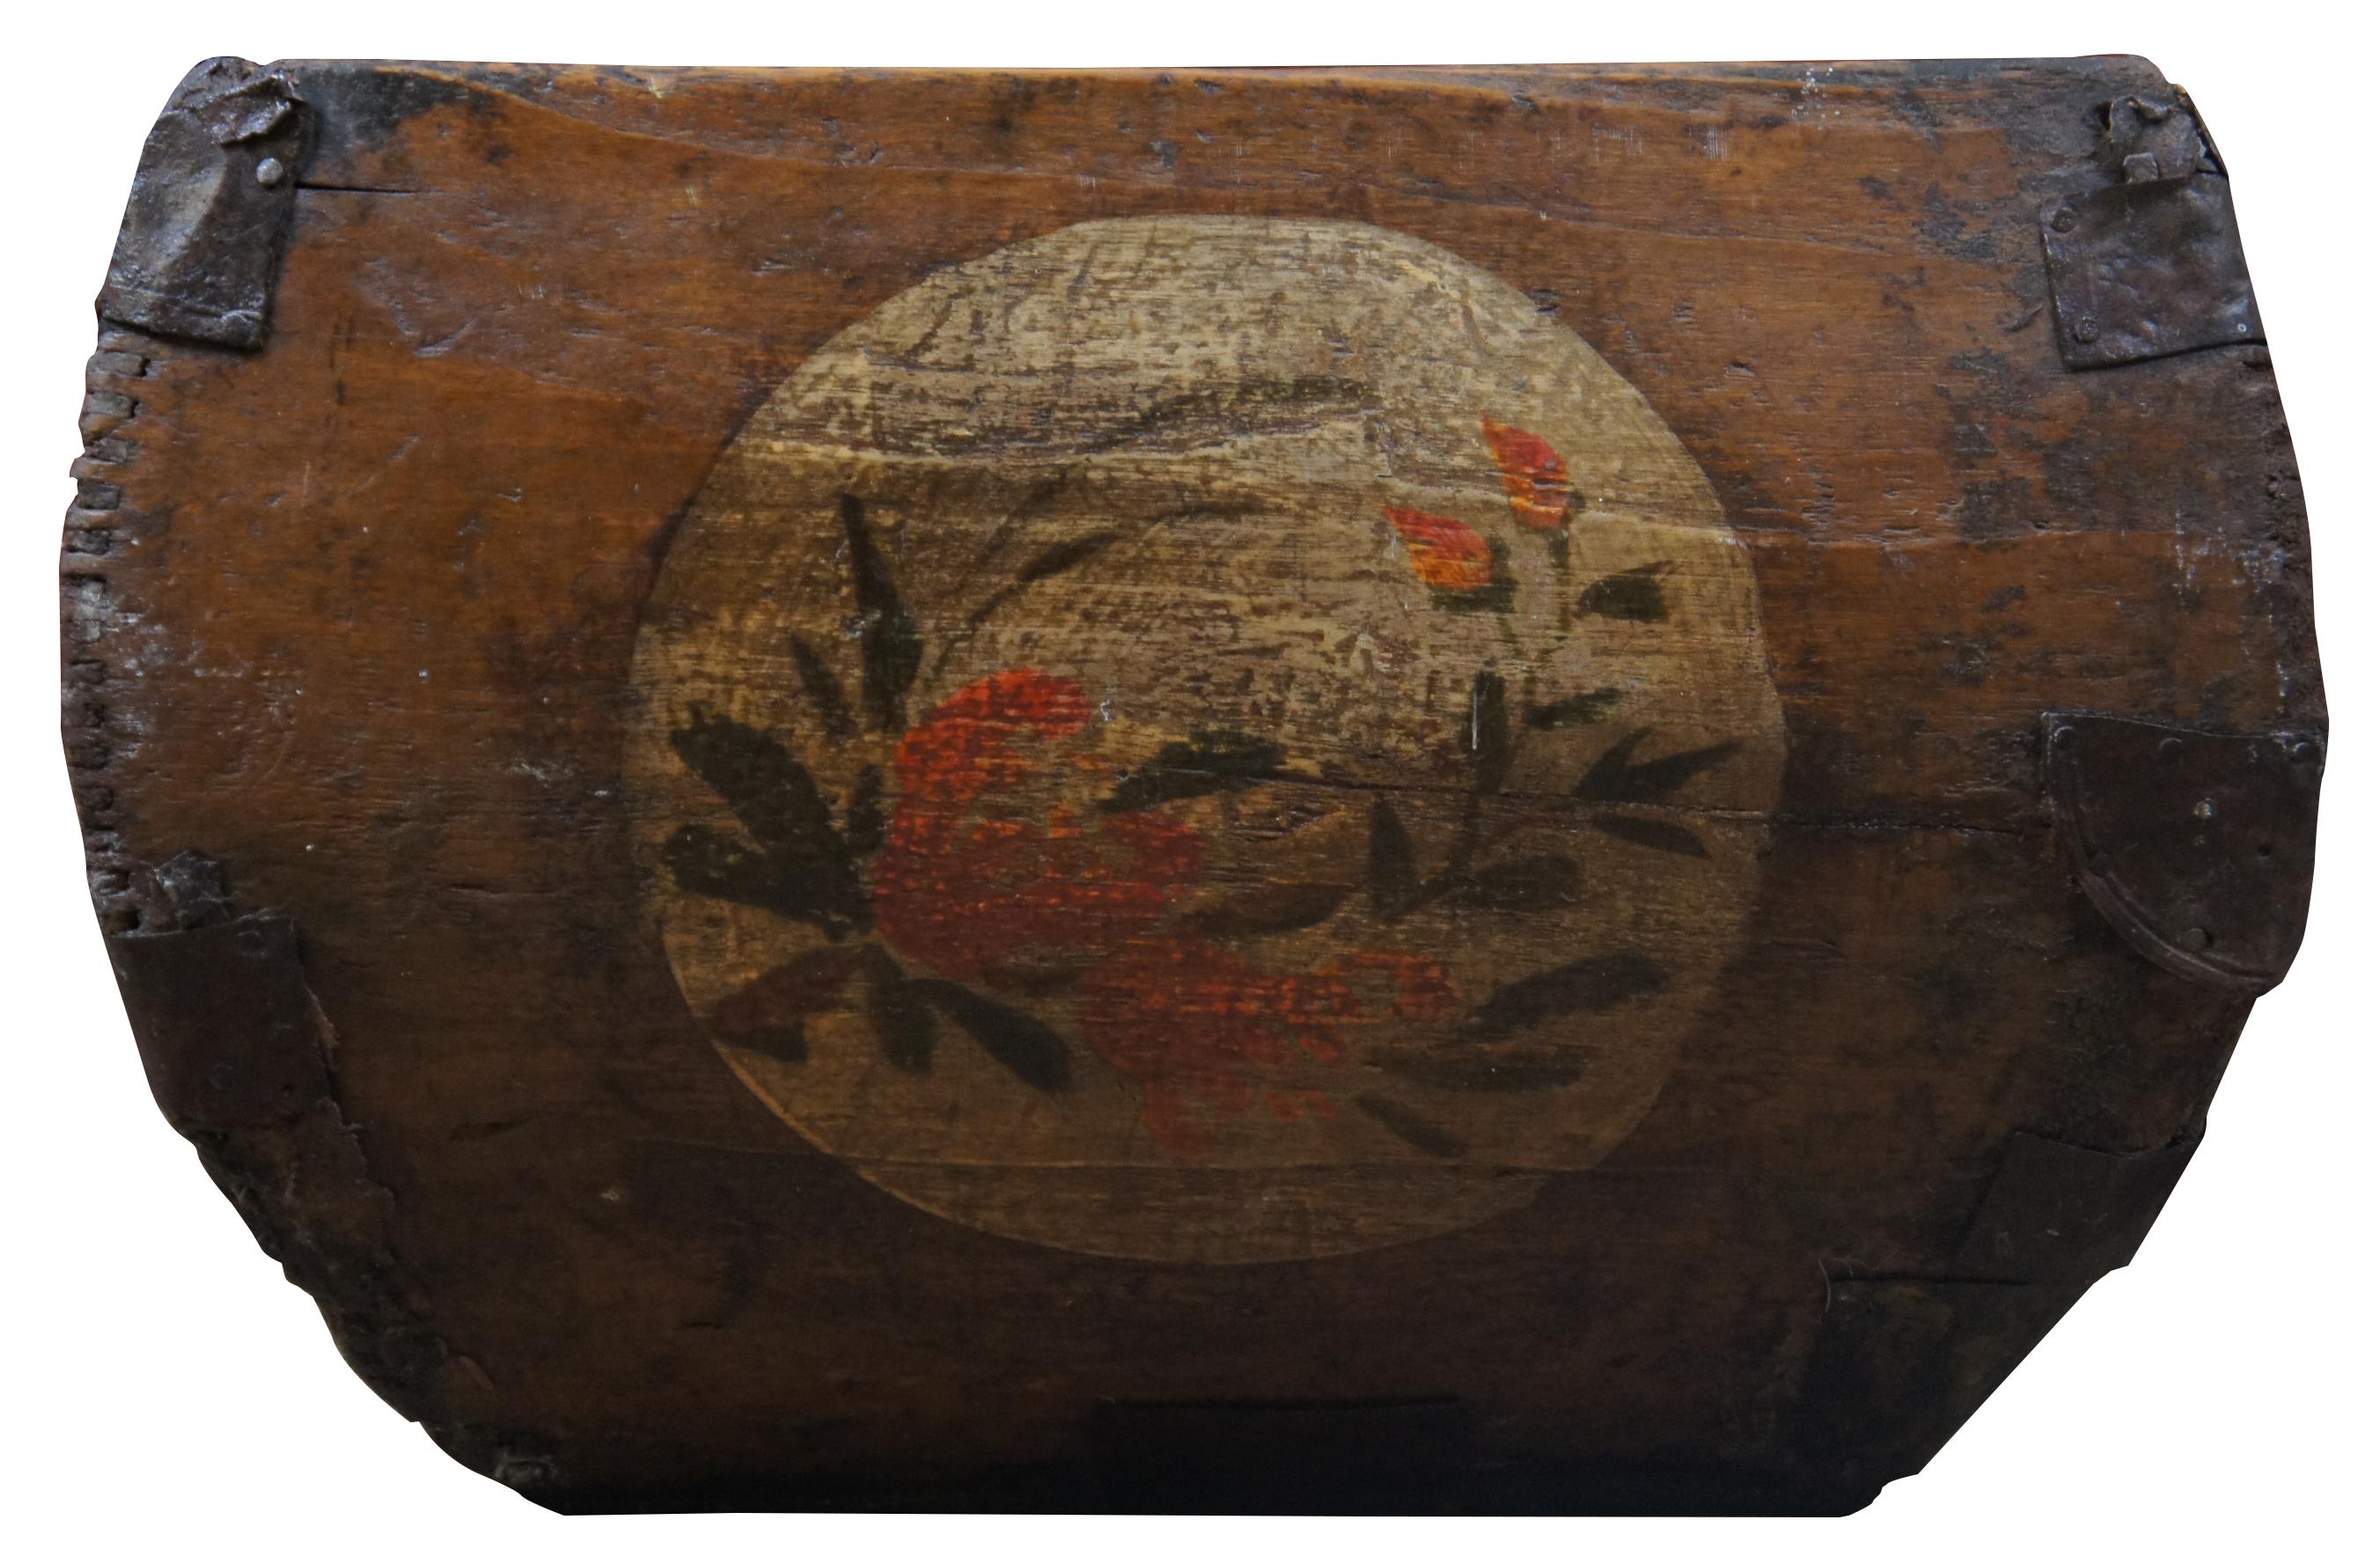 Antique wooden grain or rice measure / harvesting bucket with handle across the middle and iron accents. Two sides are painted with folk art medallions of flowers and tomatoes.
 